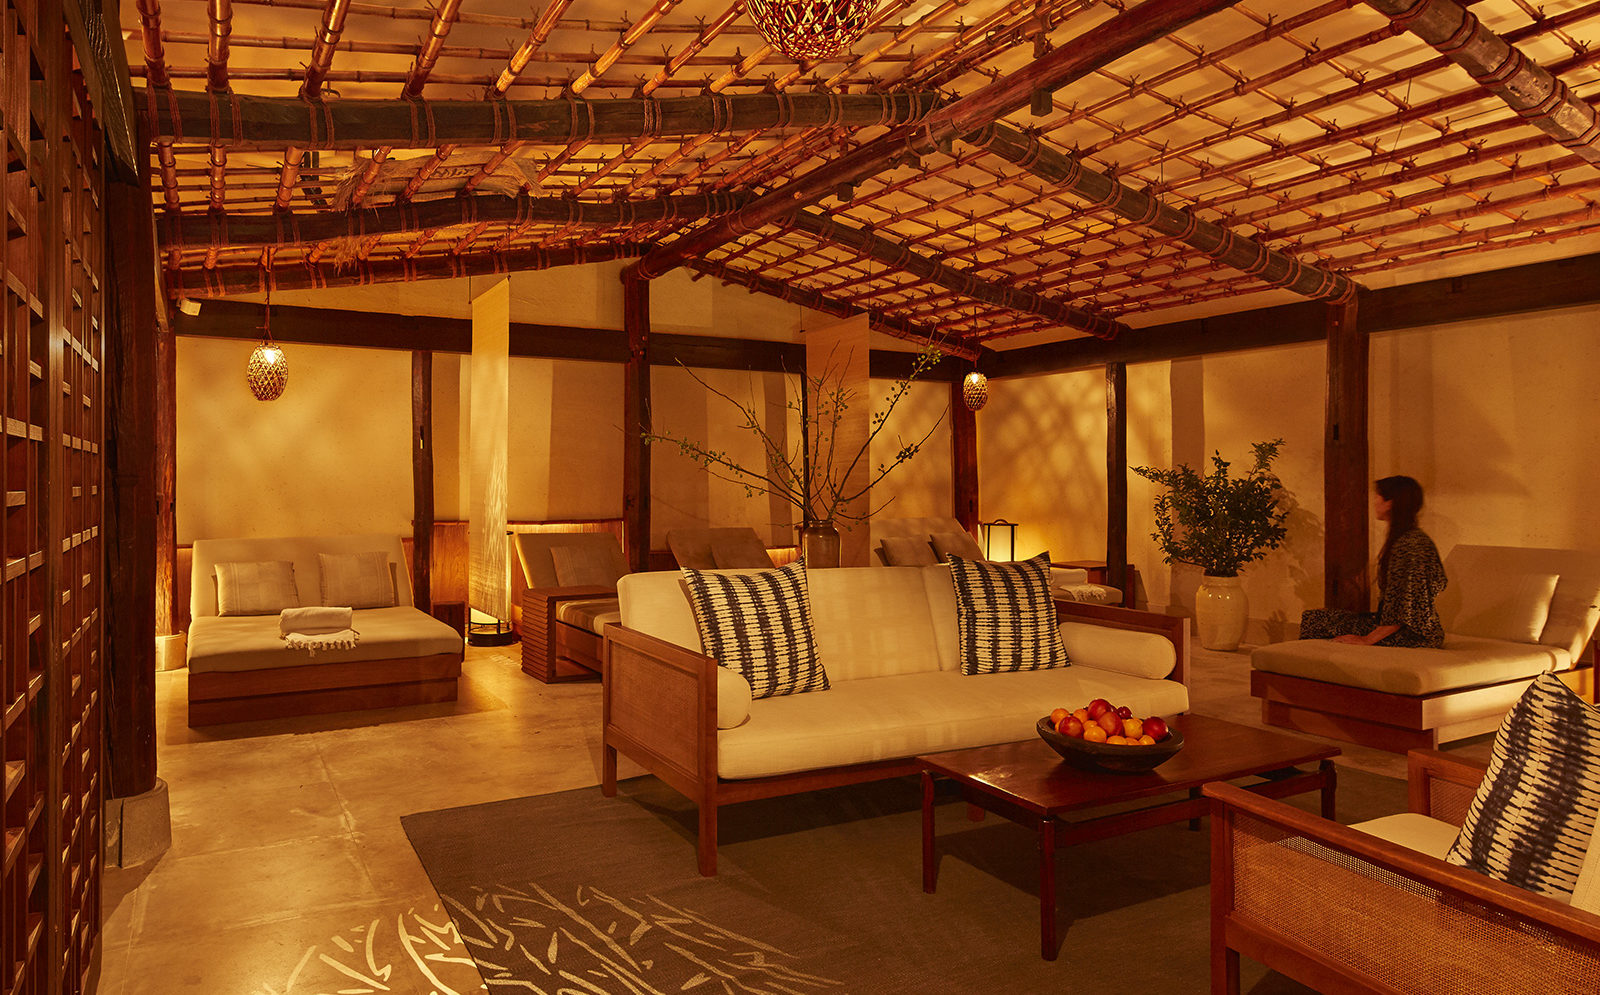 Shibui spa relaxation area at the Greenwich Hotel